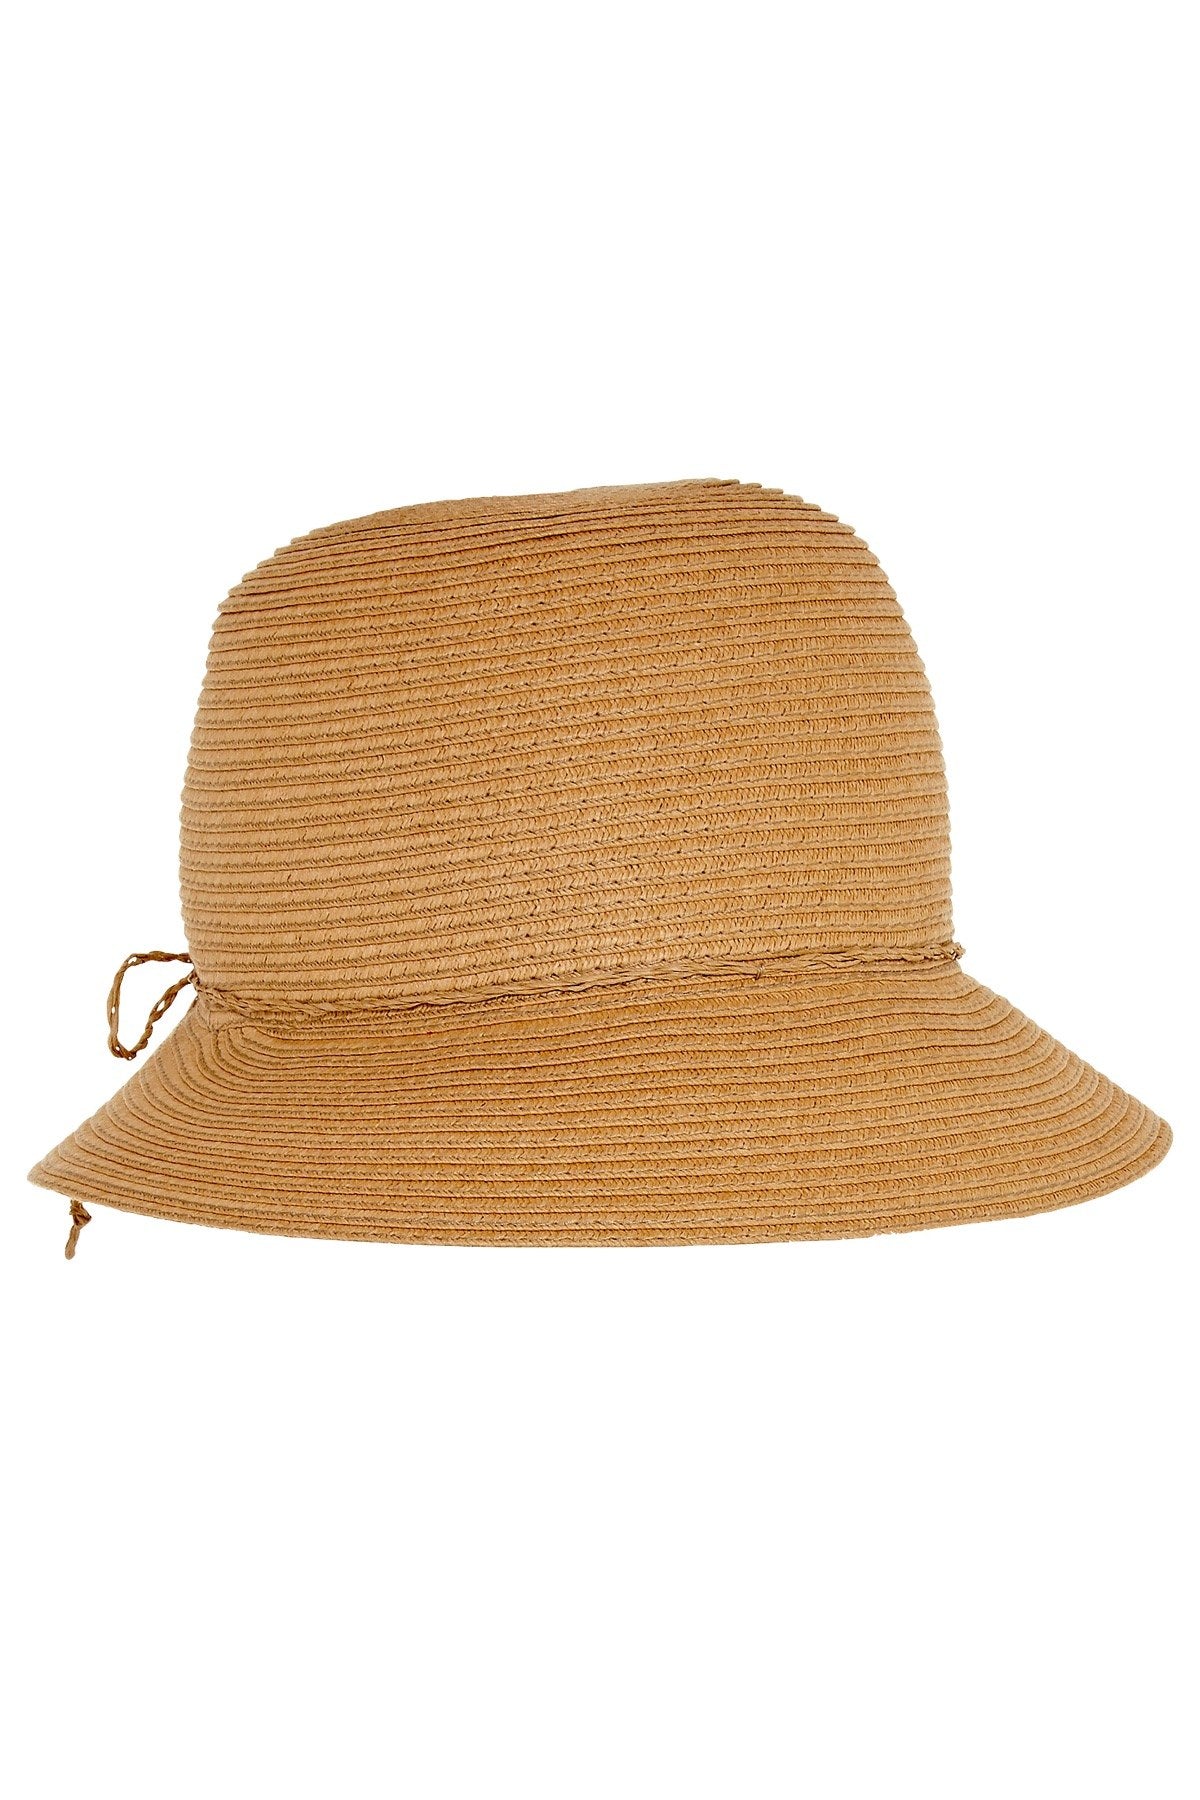 August Hat Co. Natural Bow Detail Cloche